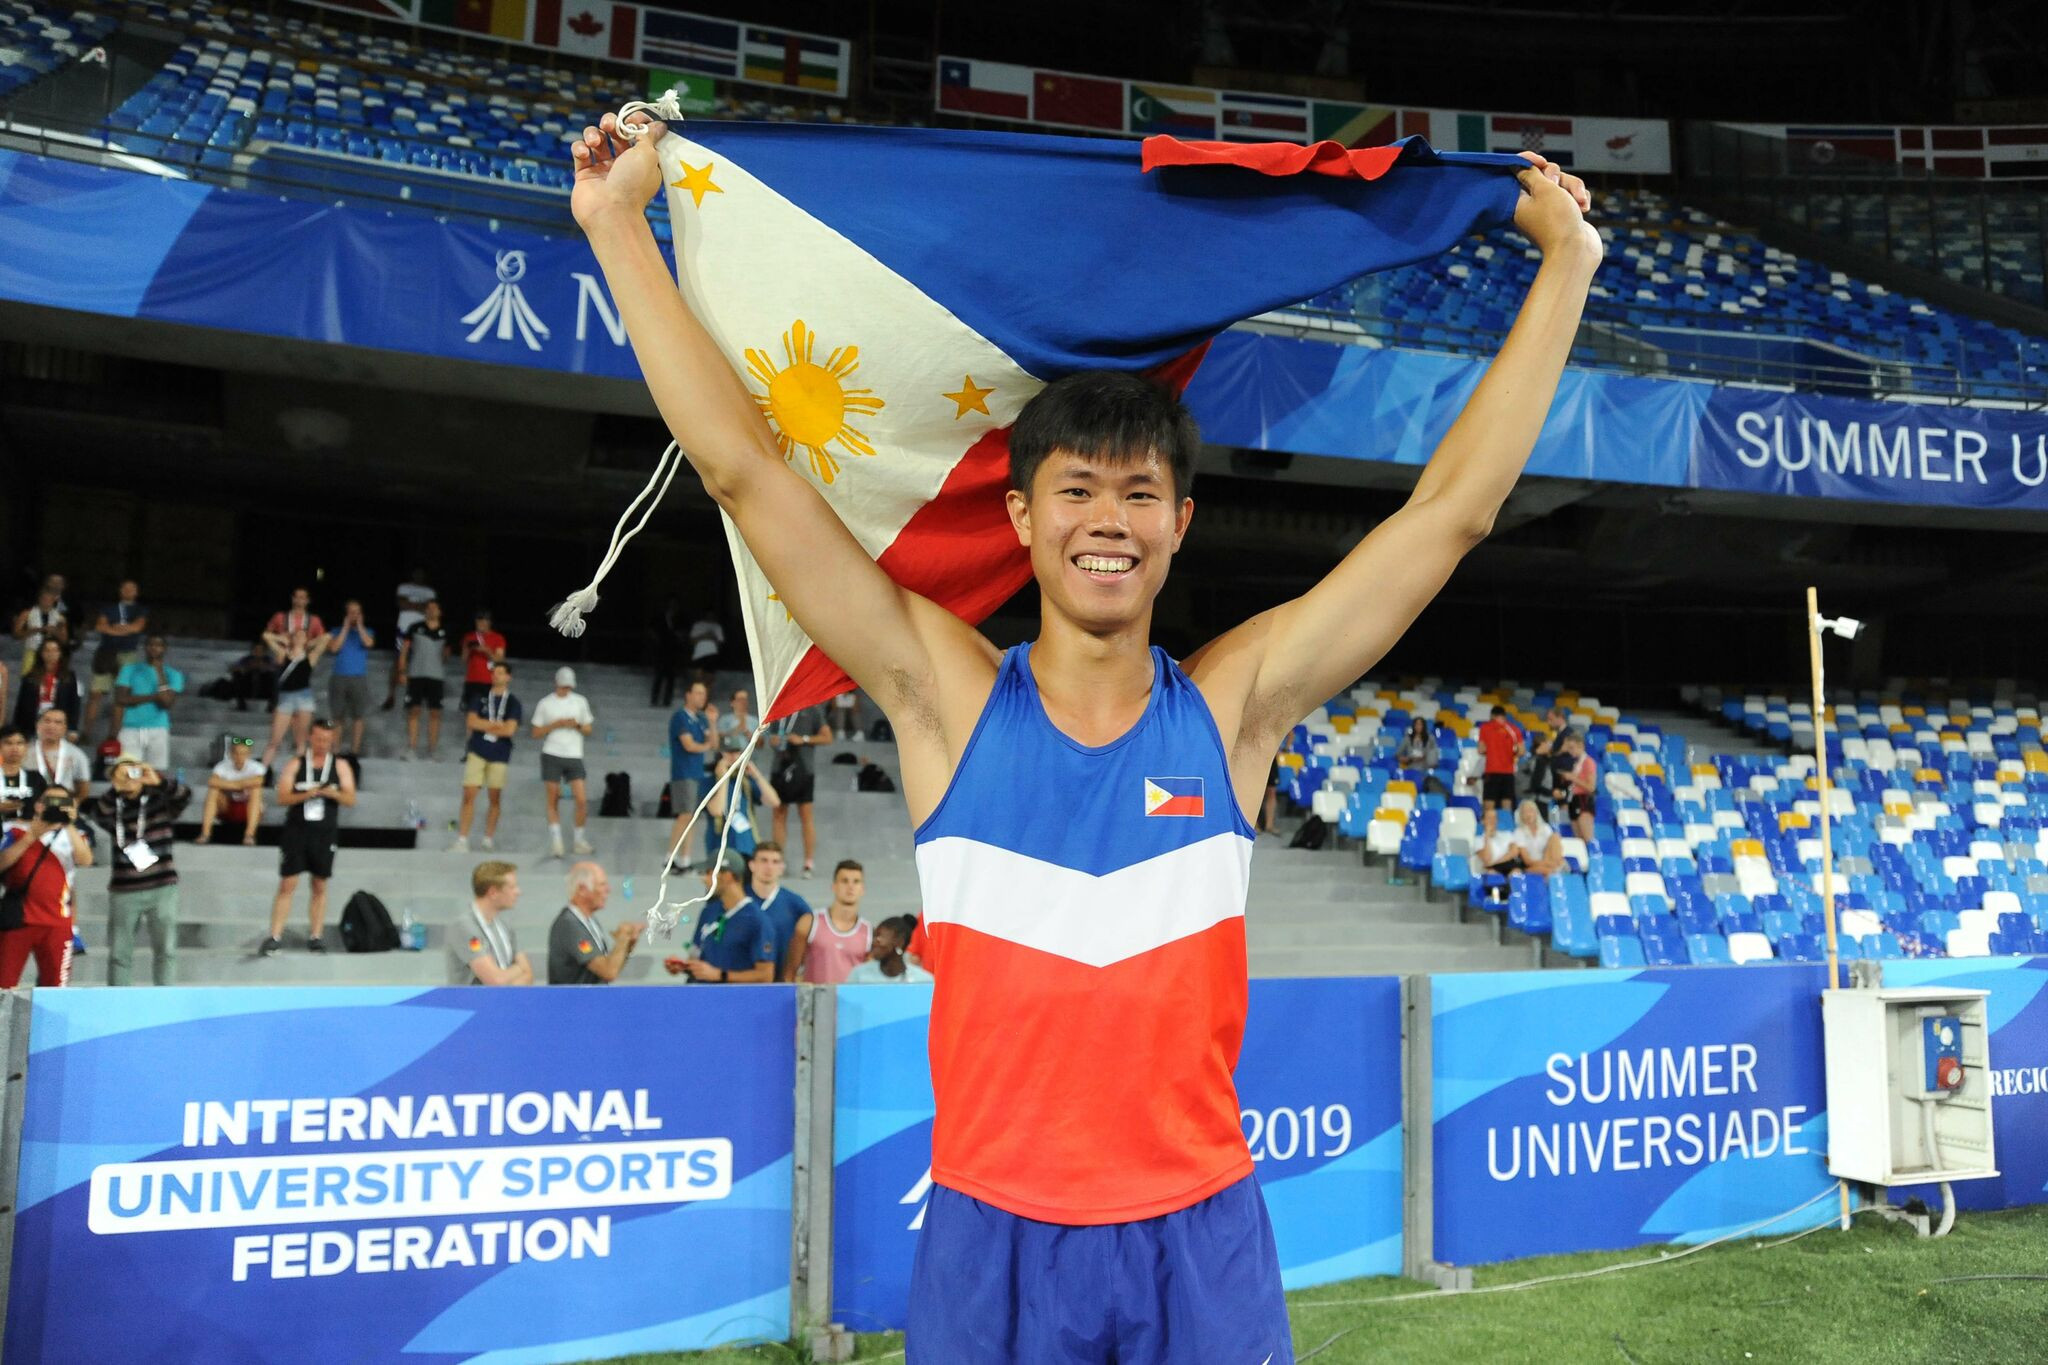 Ernest Obiena celebrates winning the pole vault at the 2019 Summer Universiade Games in Naples - the second gold medal won by the Philippines ©FISU 